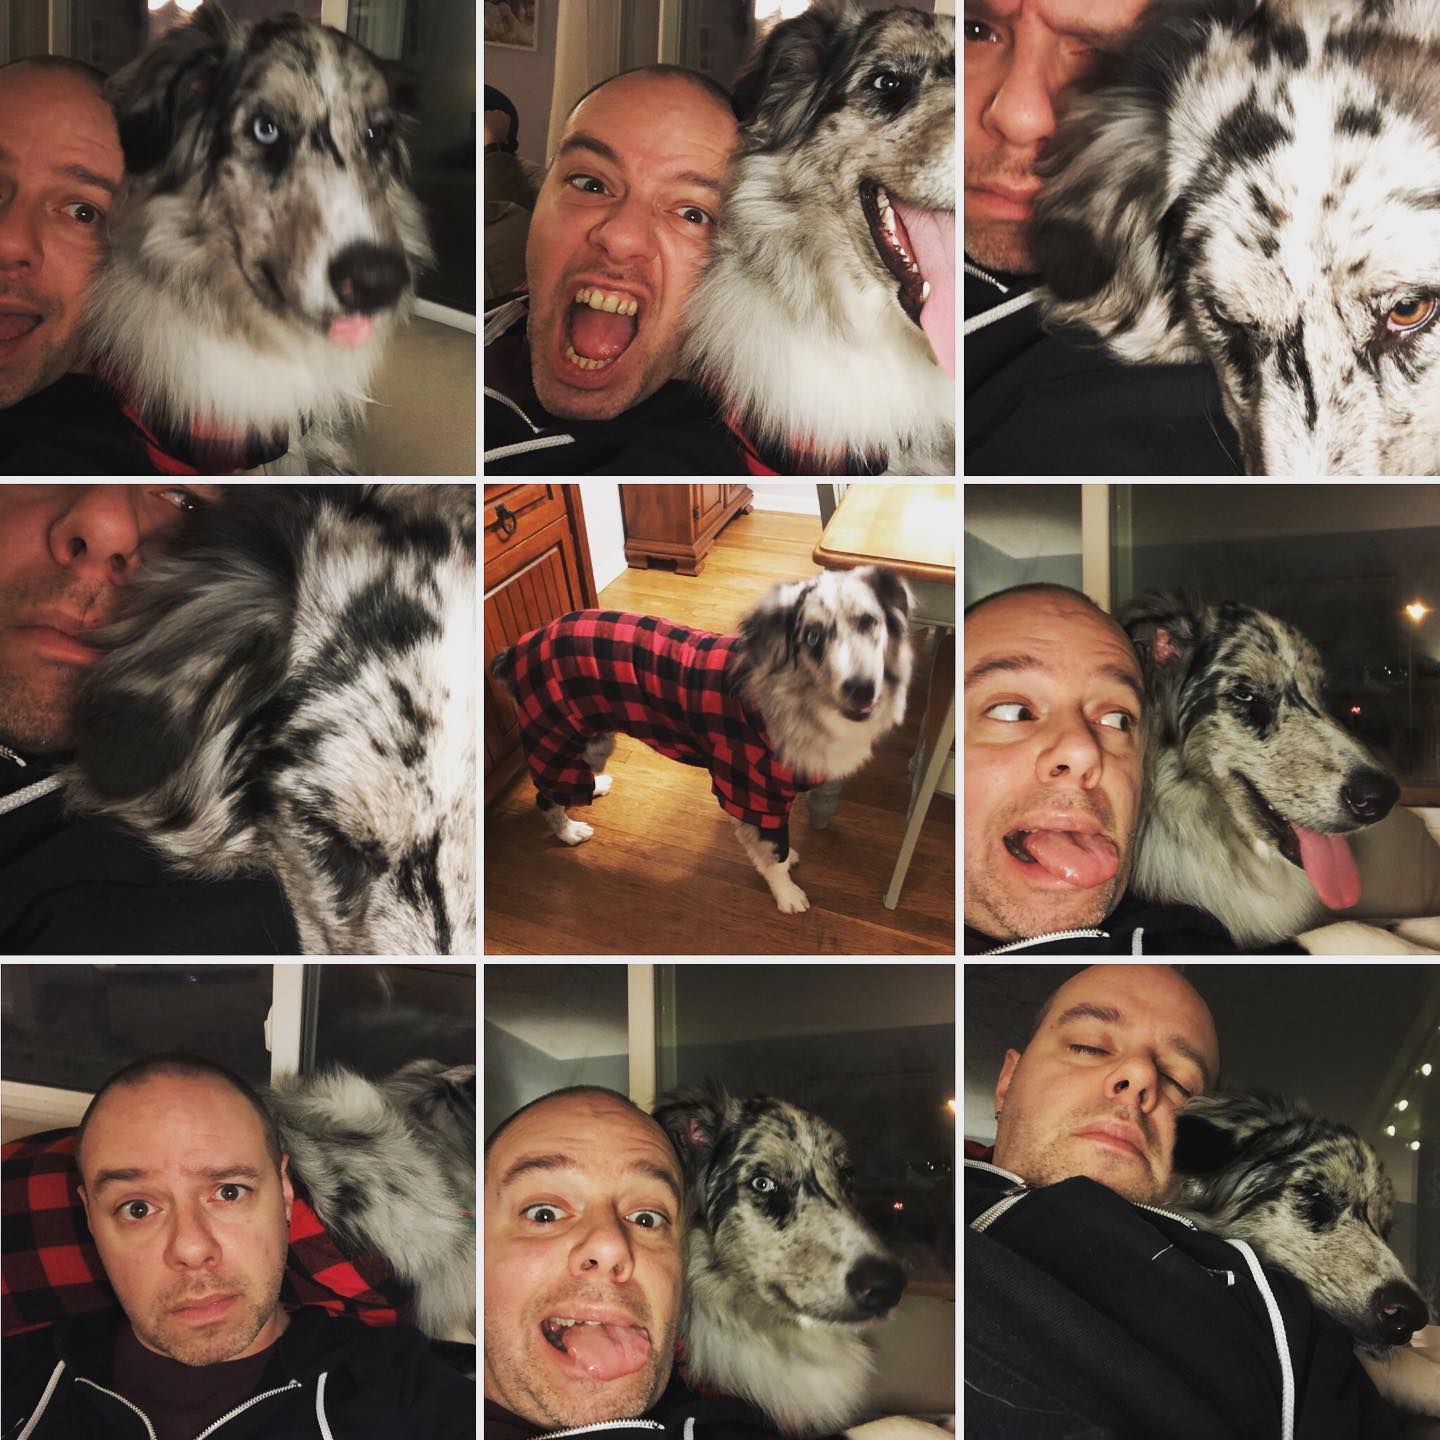 Merry Christmas! Just some holiday shenanigans from Walker Dog and I.